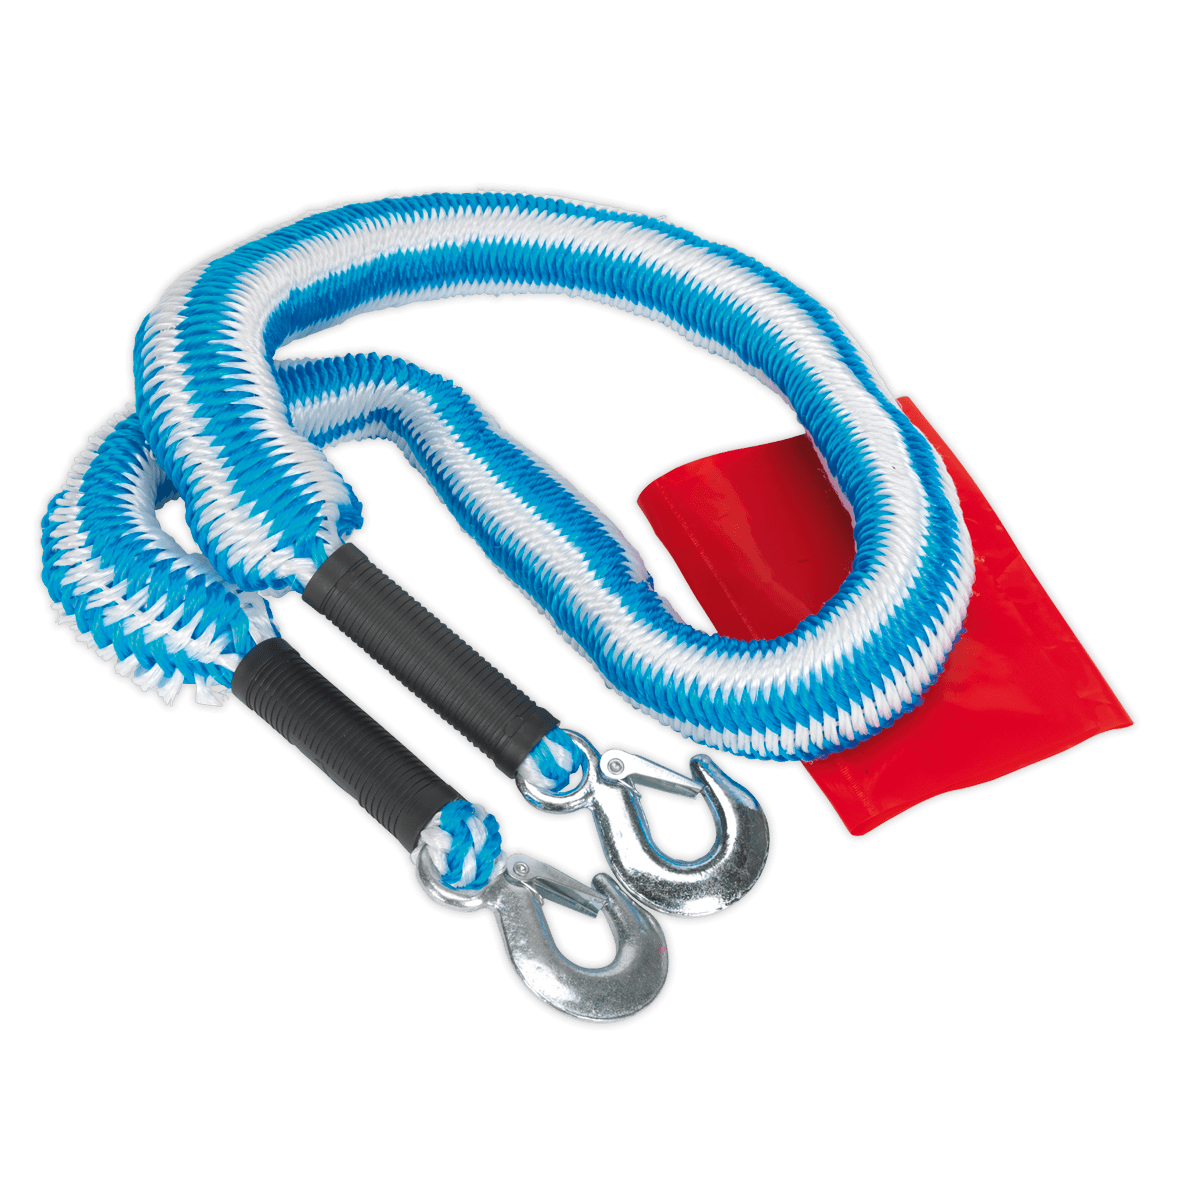 Sealey Tow Rope 2000kg Rolling Load Capacity